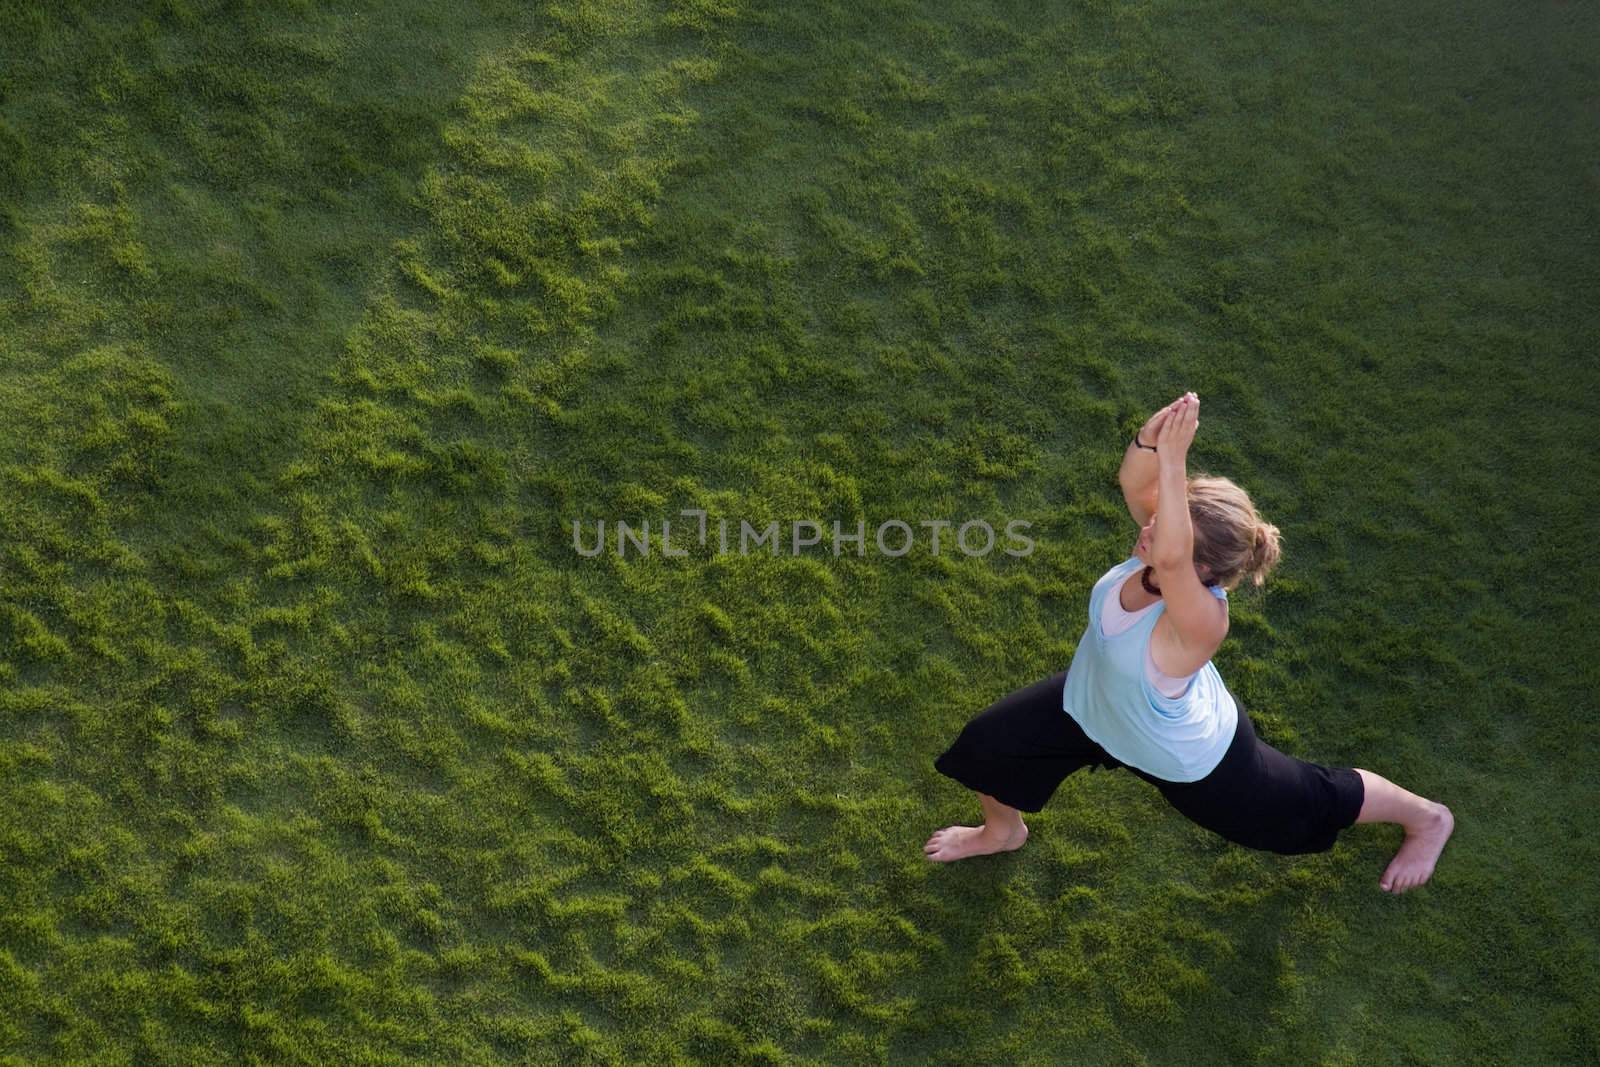 Woman doing yoga in the grass. Shot from above.